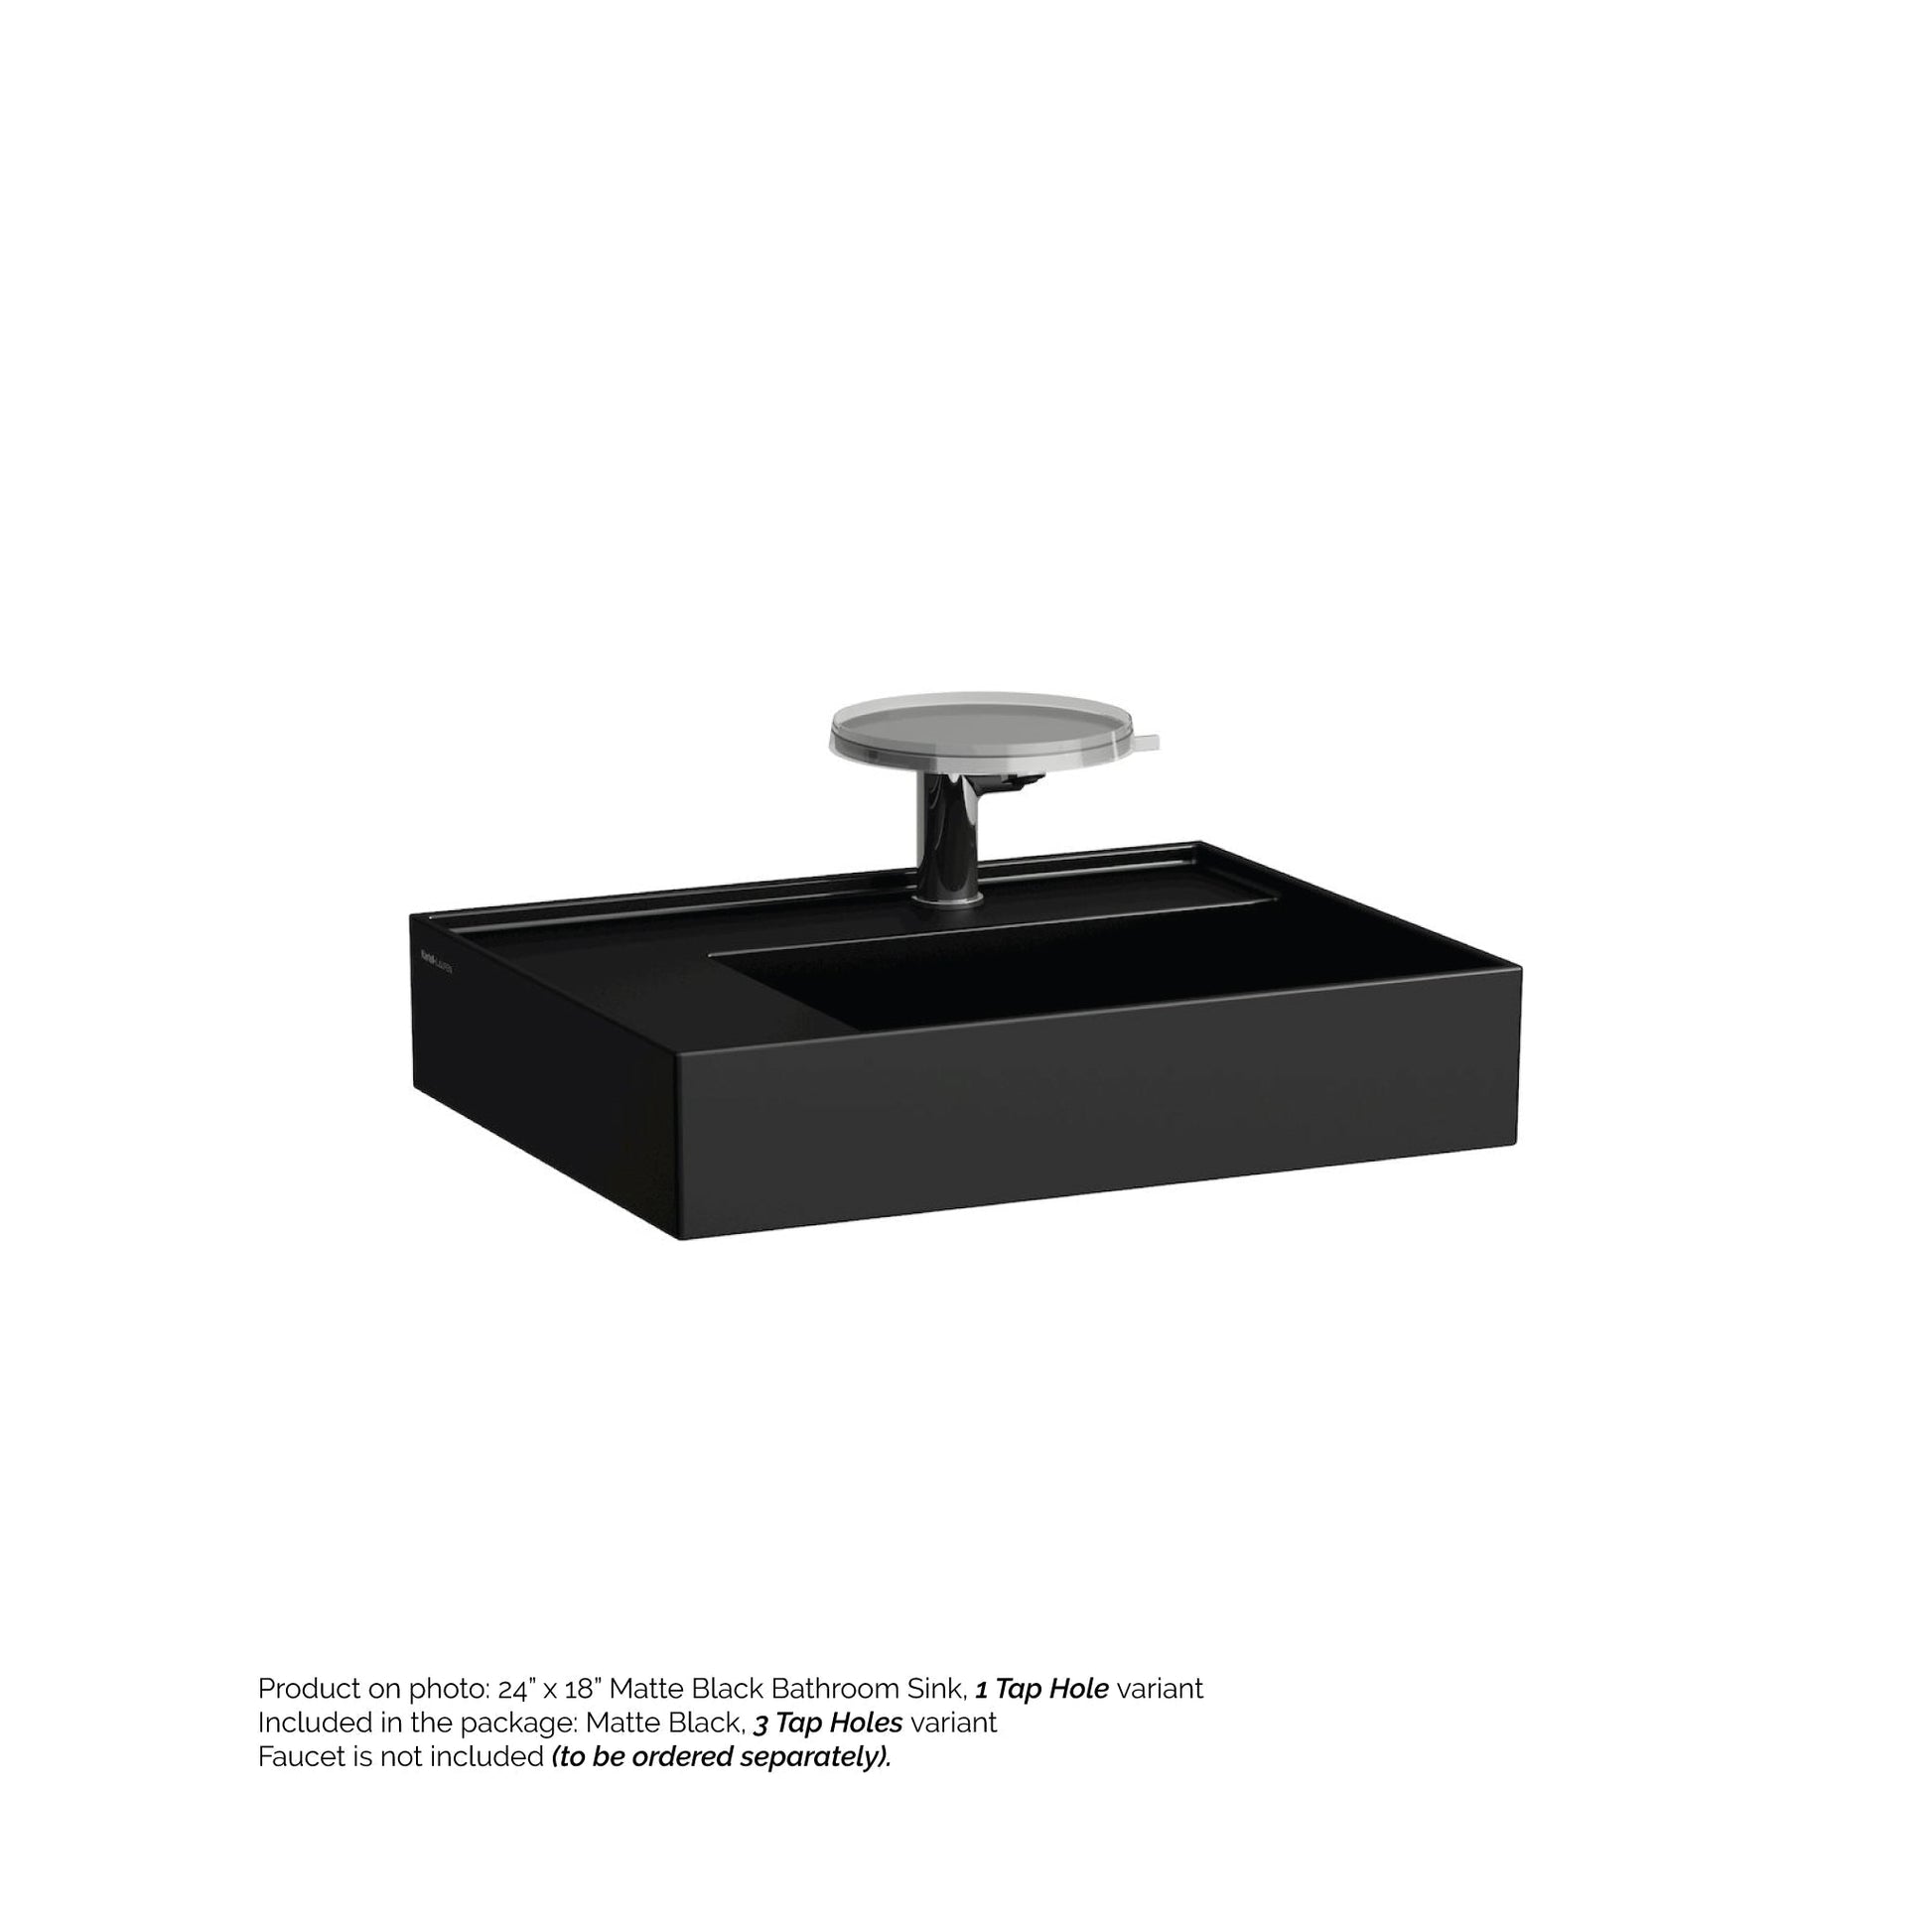 Laufen Kartell 24" x 18" Matte Black Wall-Mounted Shelf-Left Bathroom Sink With 3 Faucet Holes